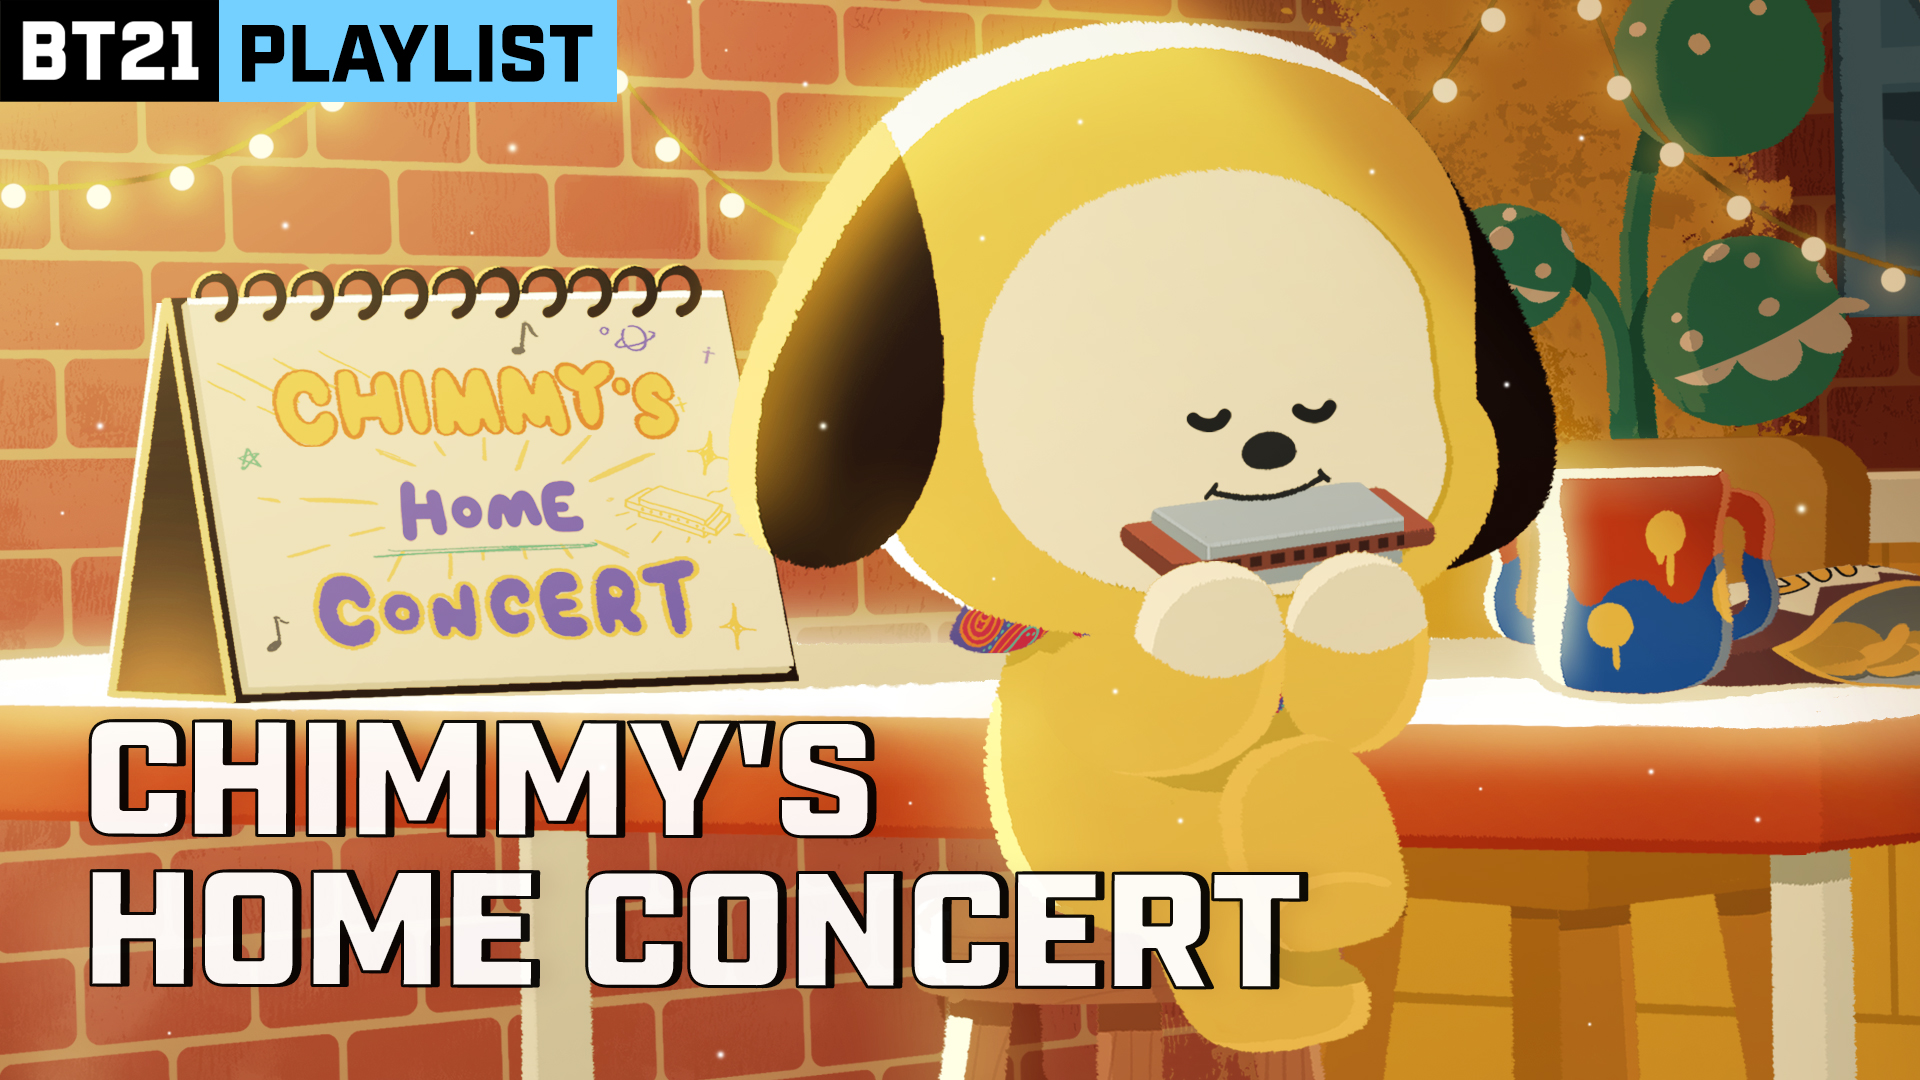 [BT21] CHIMMY's HOME CONCERT (2020/04/30)